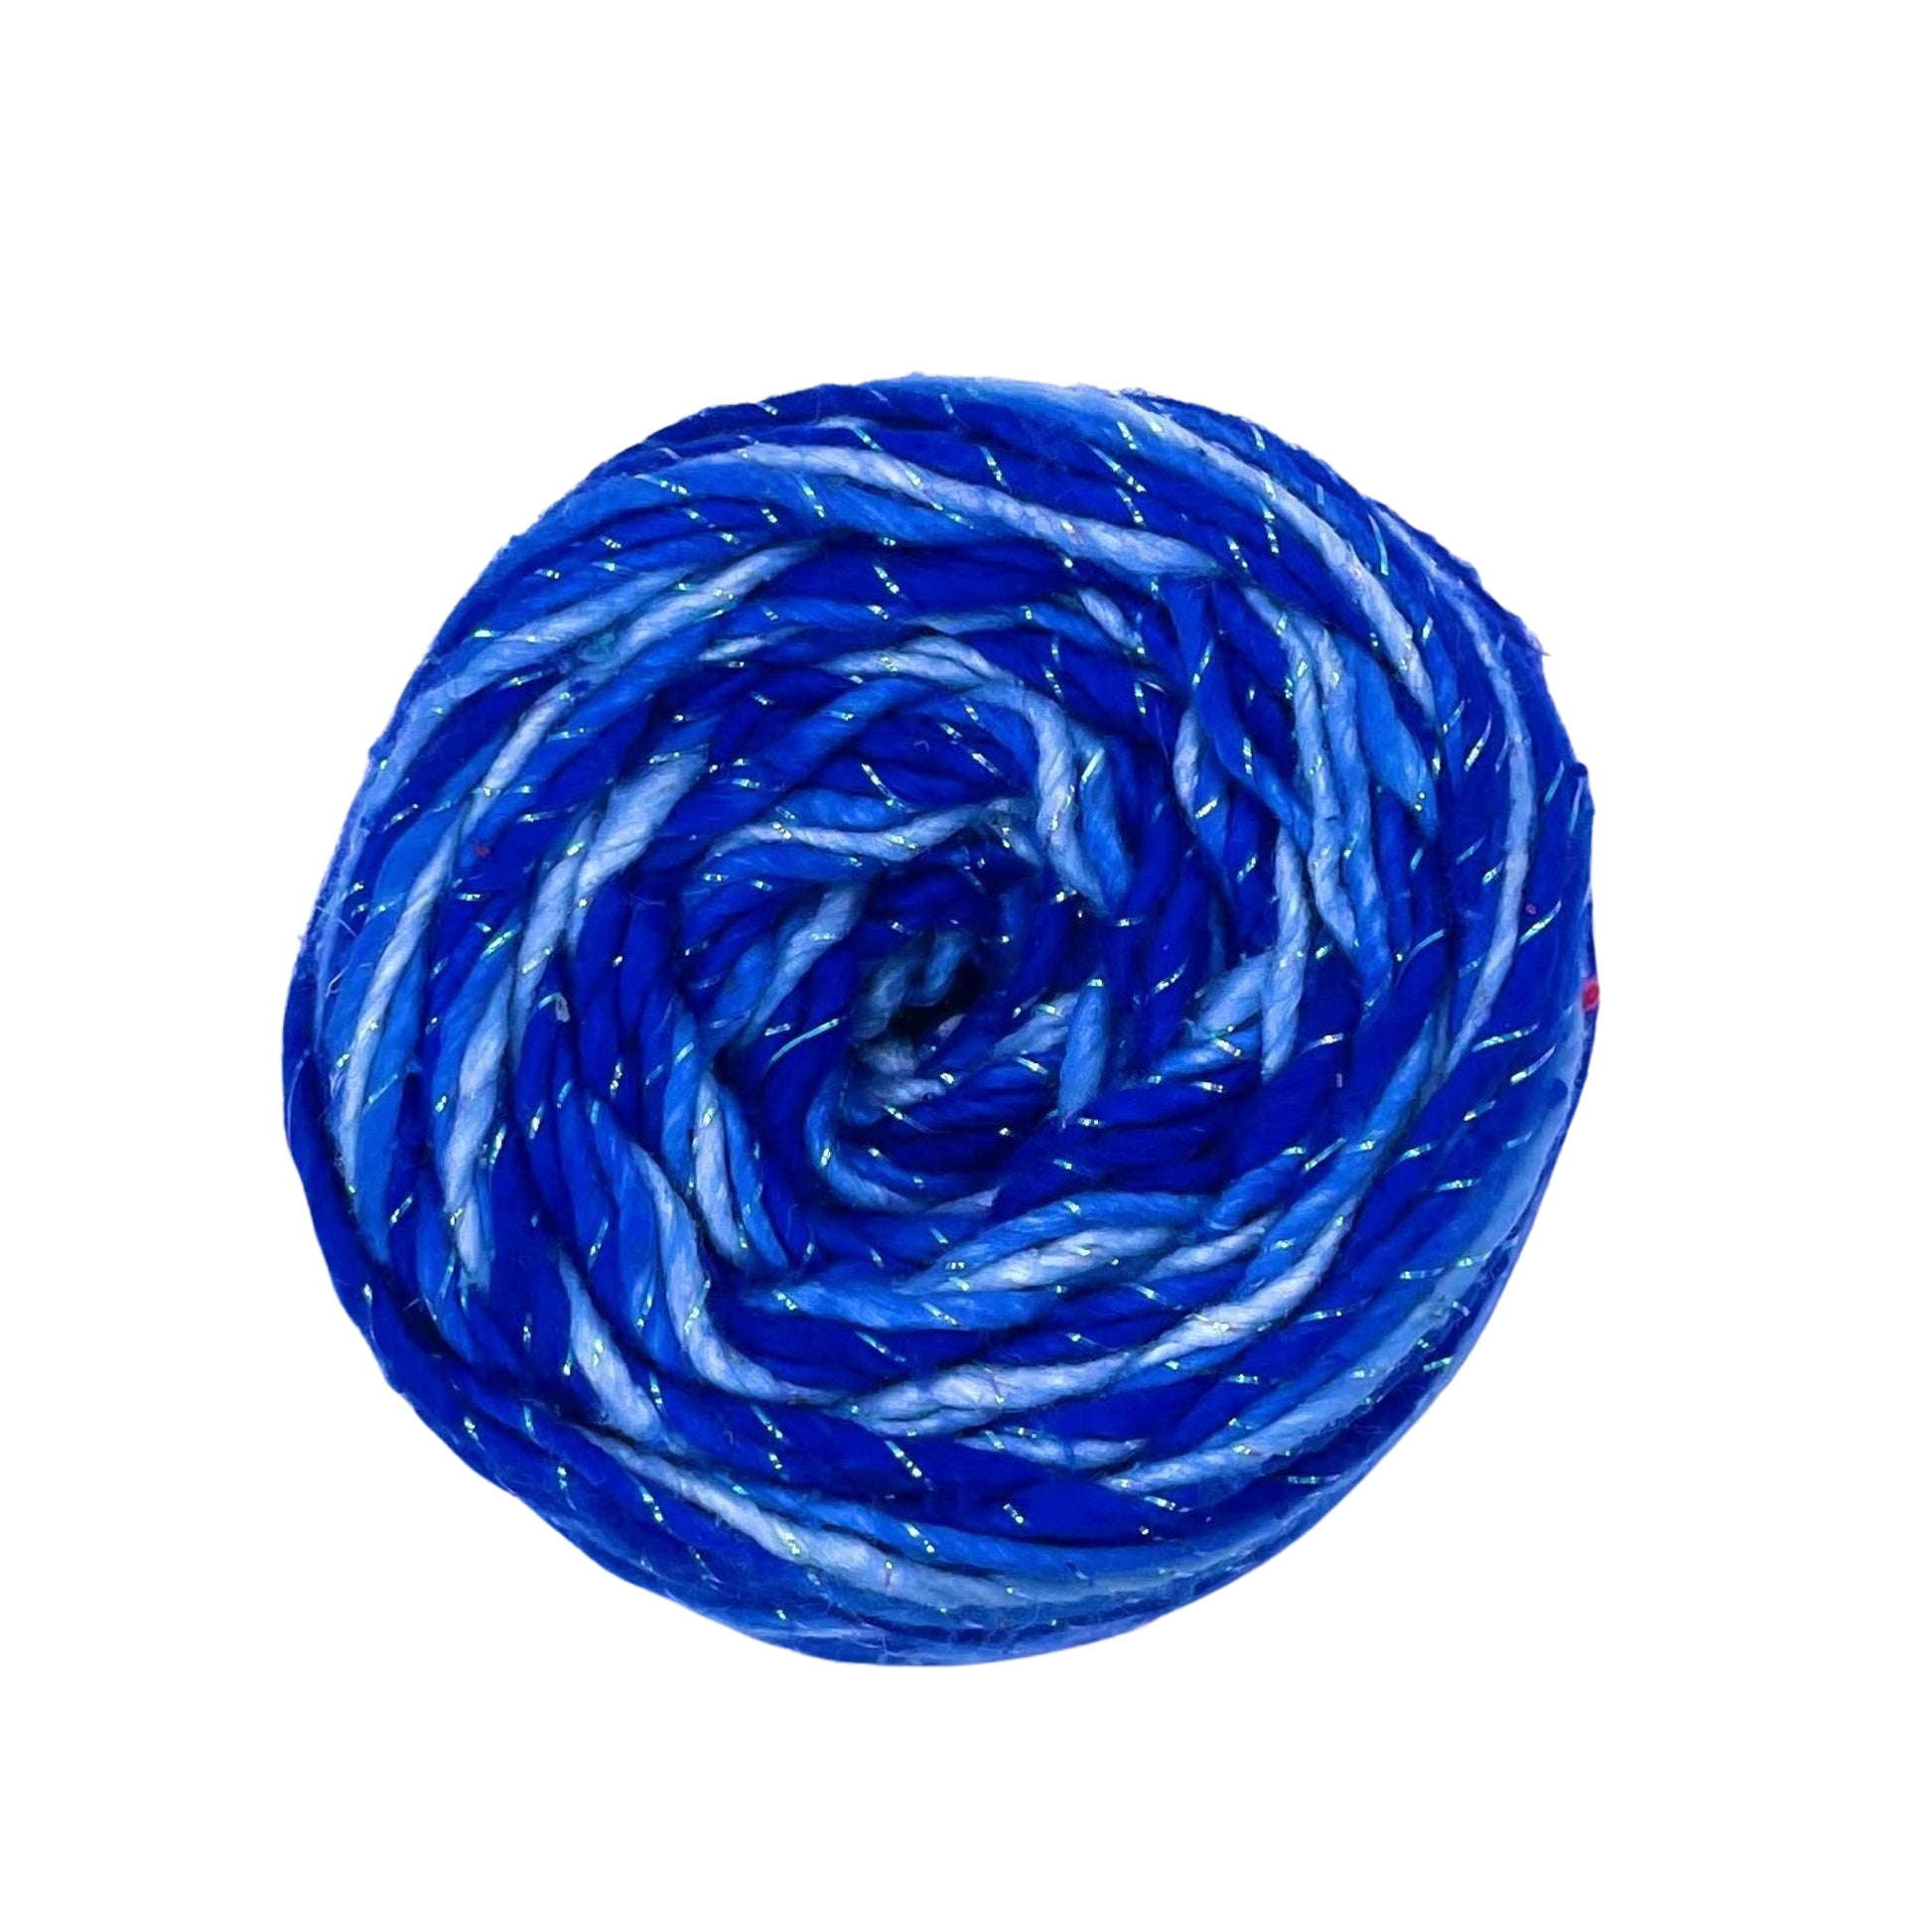 A skein of 4 shades of blue and sparkle on a white background